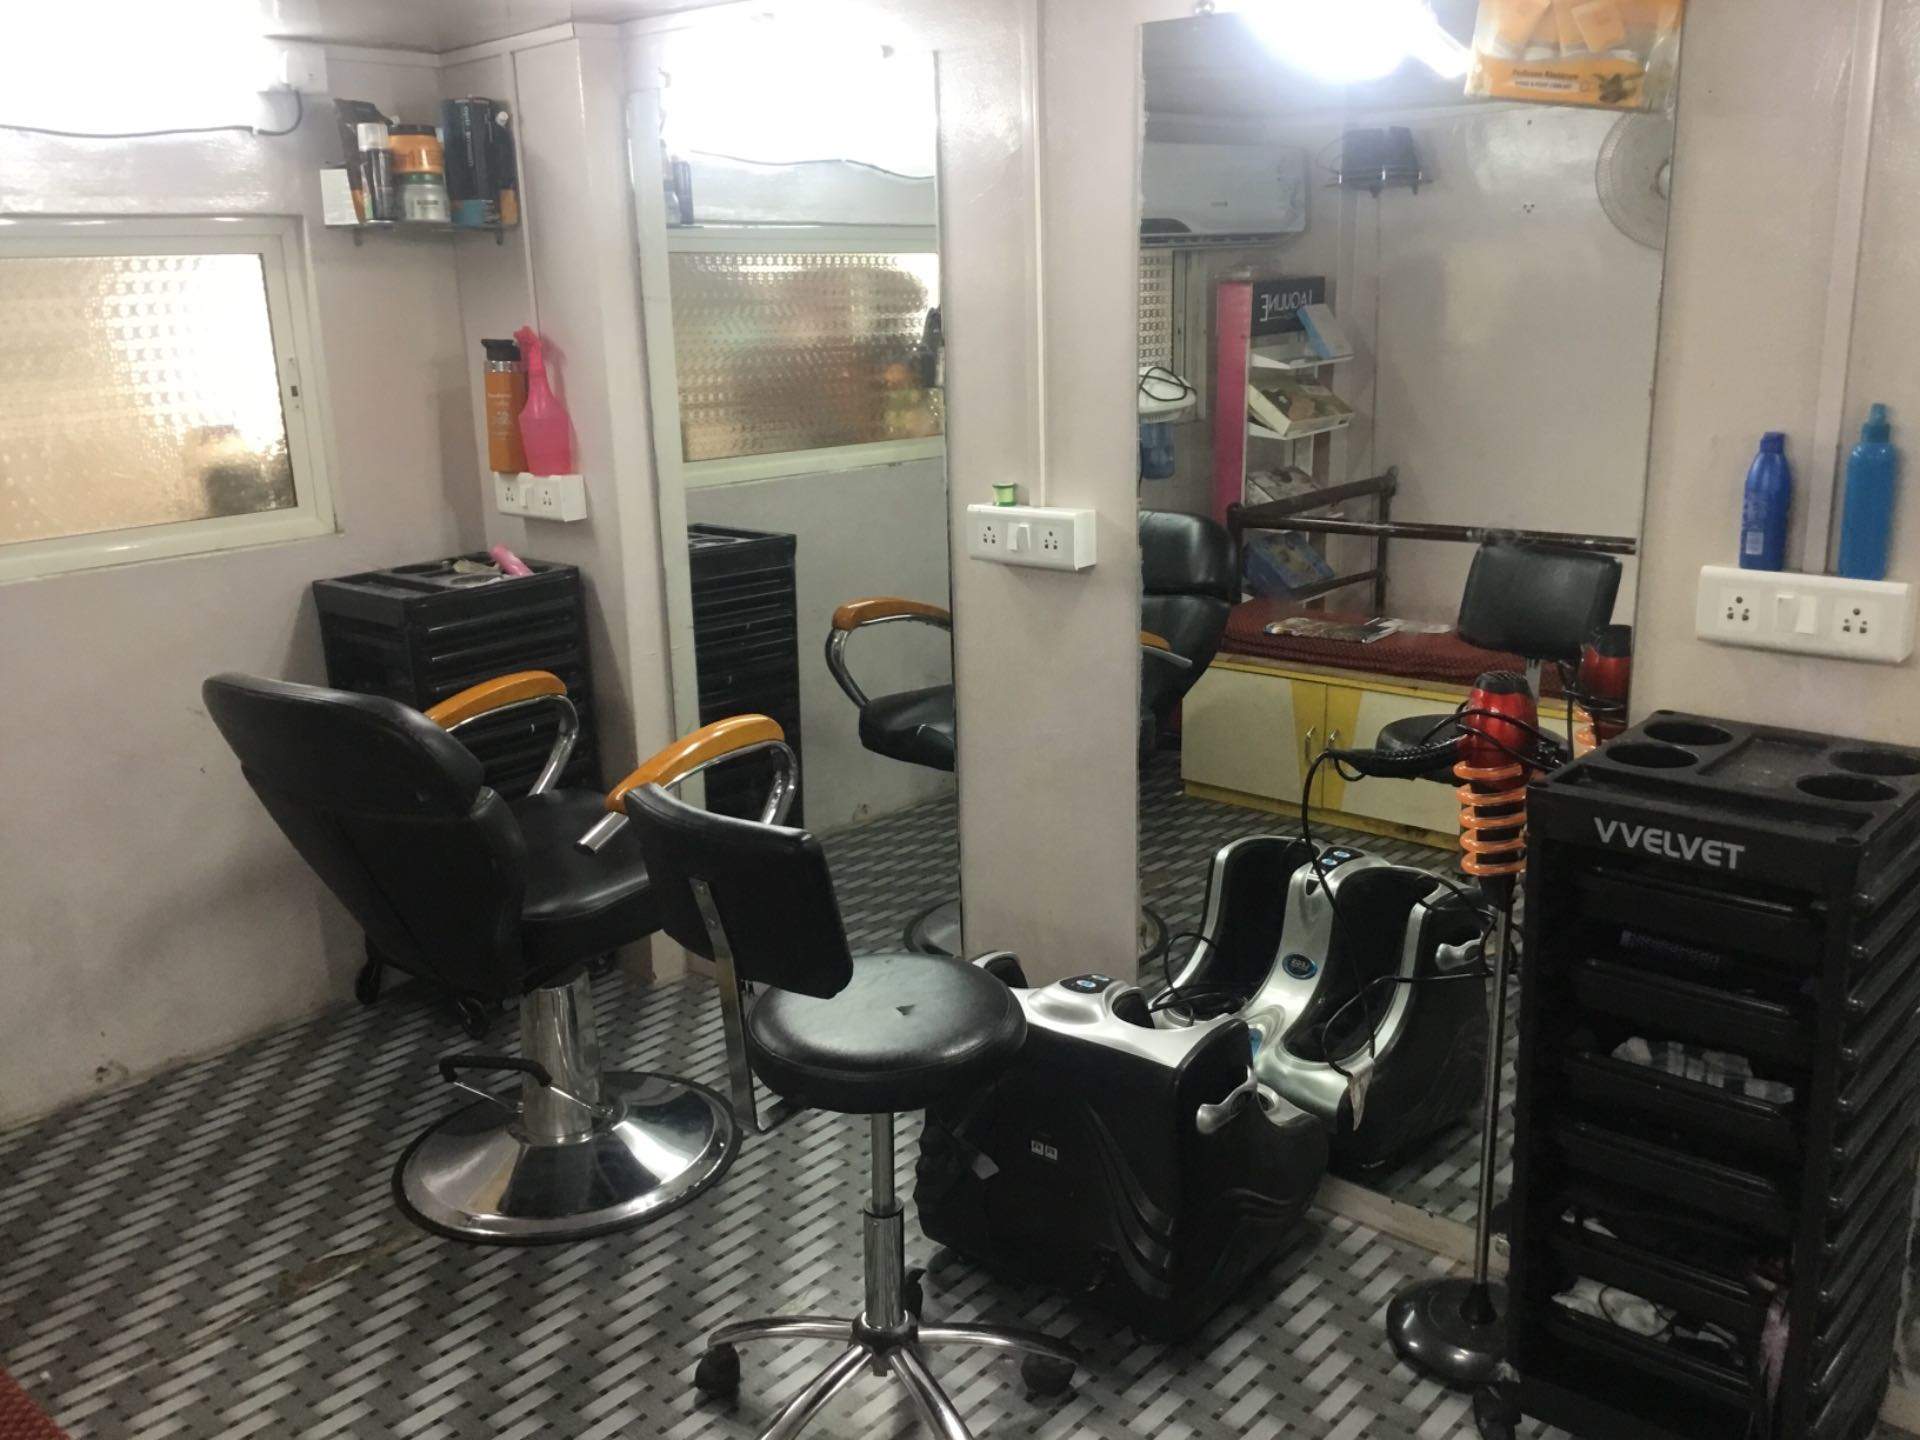 Monas Beauty Salon And Training Center Photos, Vadgaon - Office Chair , HD Wallpaper & Backgrounds